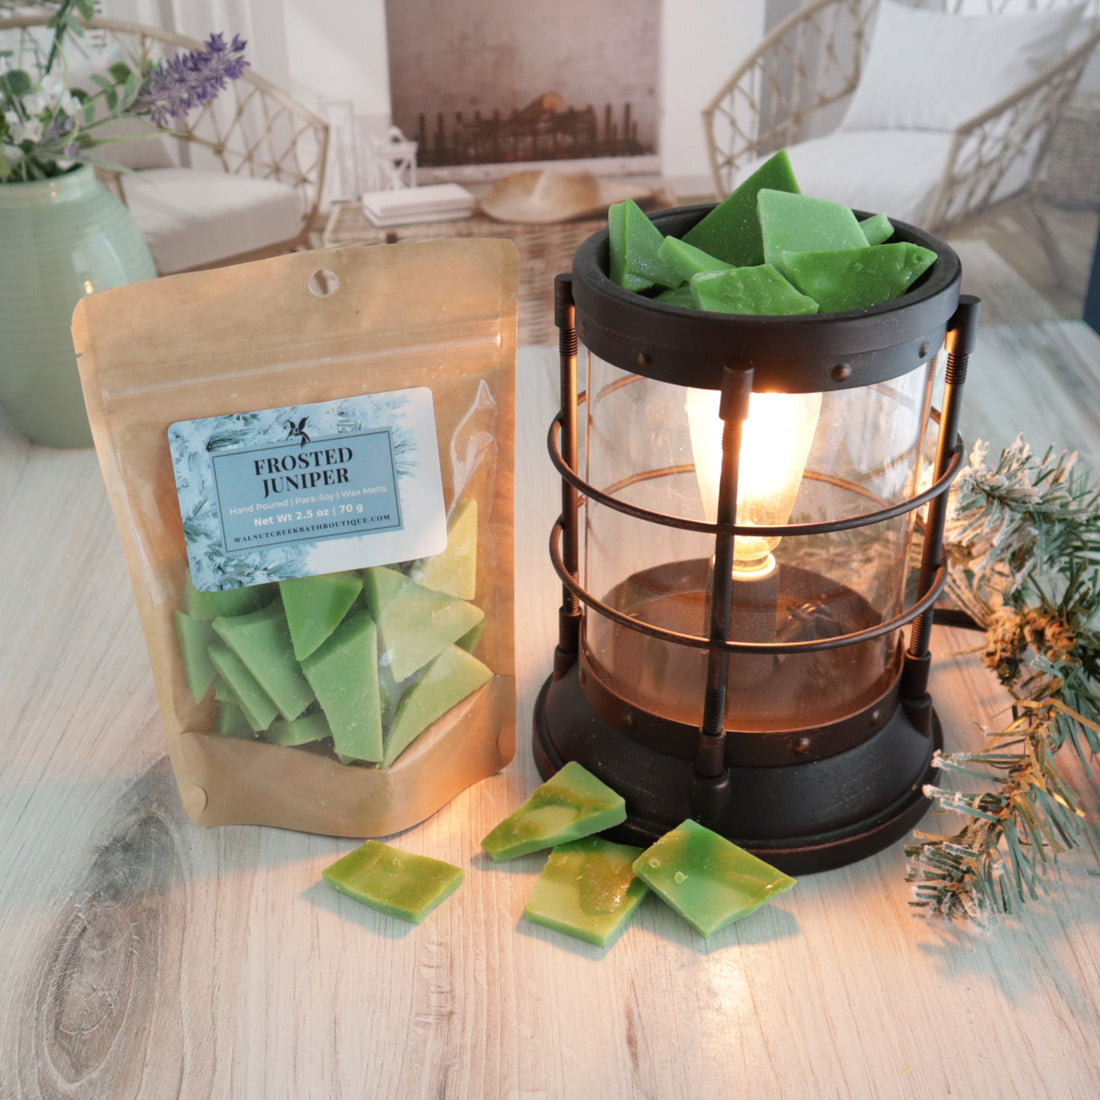 a bag of frosted juniper wax melts are standing next to a lit wax melt burner. this has some of the green wax pieces piled in it. there are also some pieces scattered around between the bag and the burner. there is a sprig of frosted pine branch to the right of the burner. this is all sitting on a washed out wooden base with a couple of chairs in the background next to a fireplace